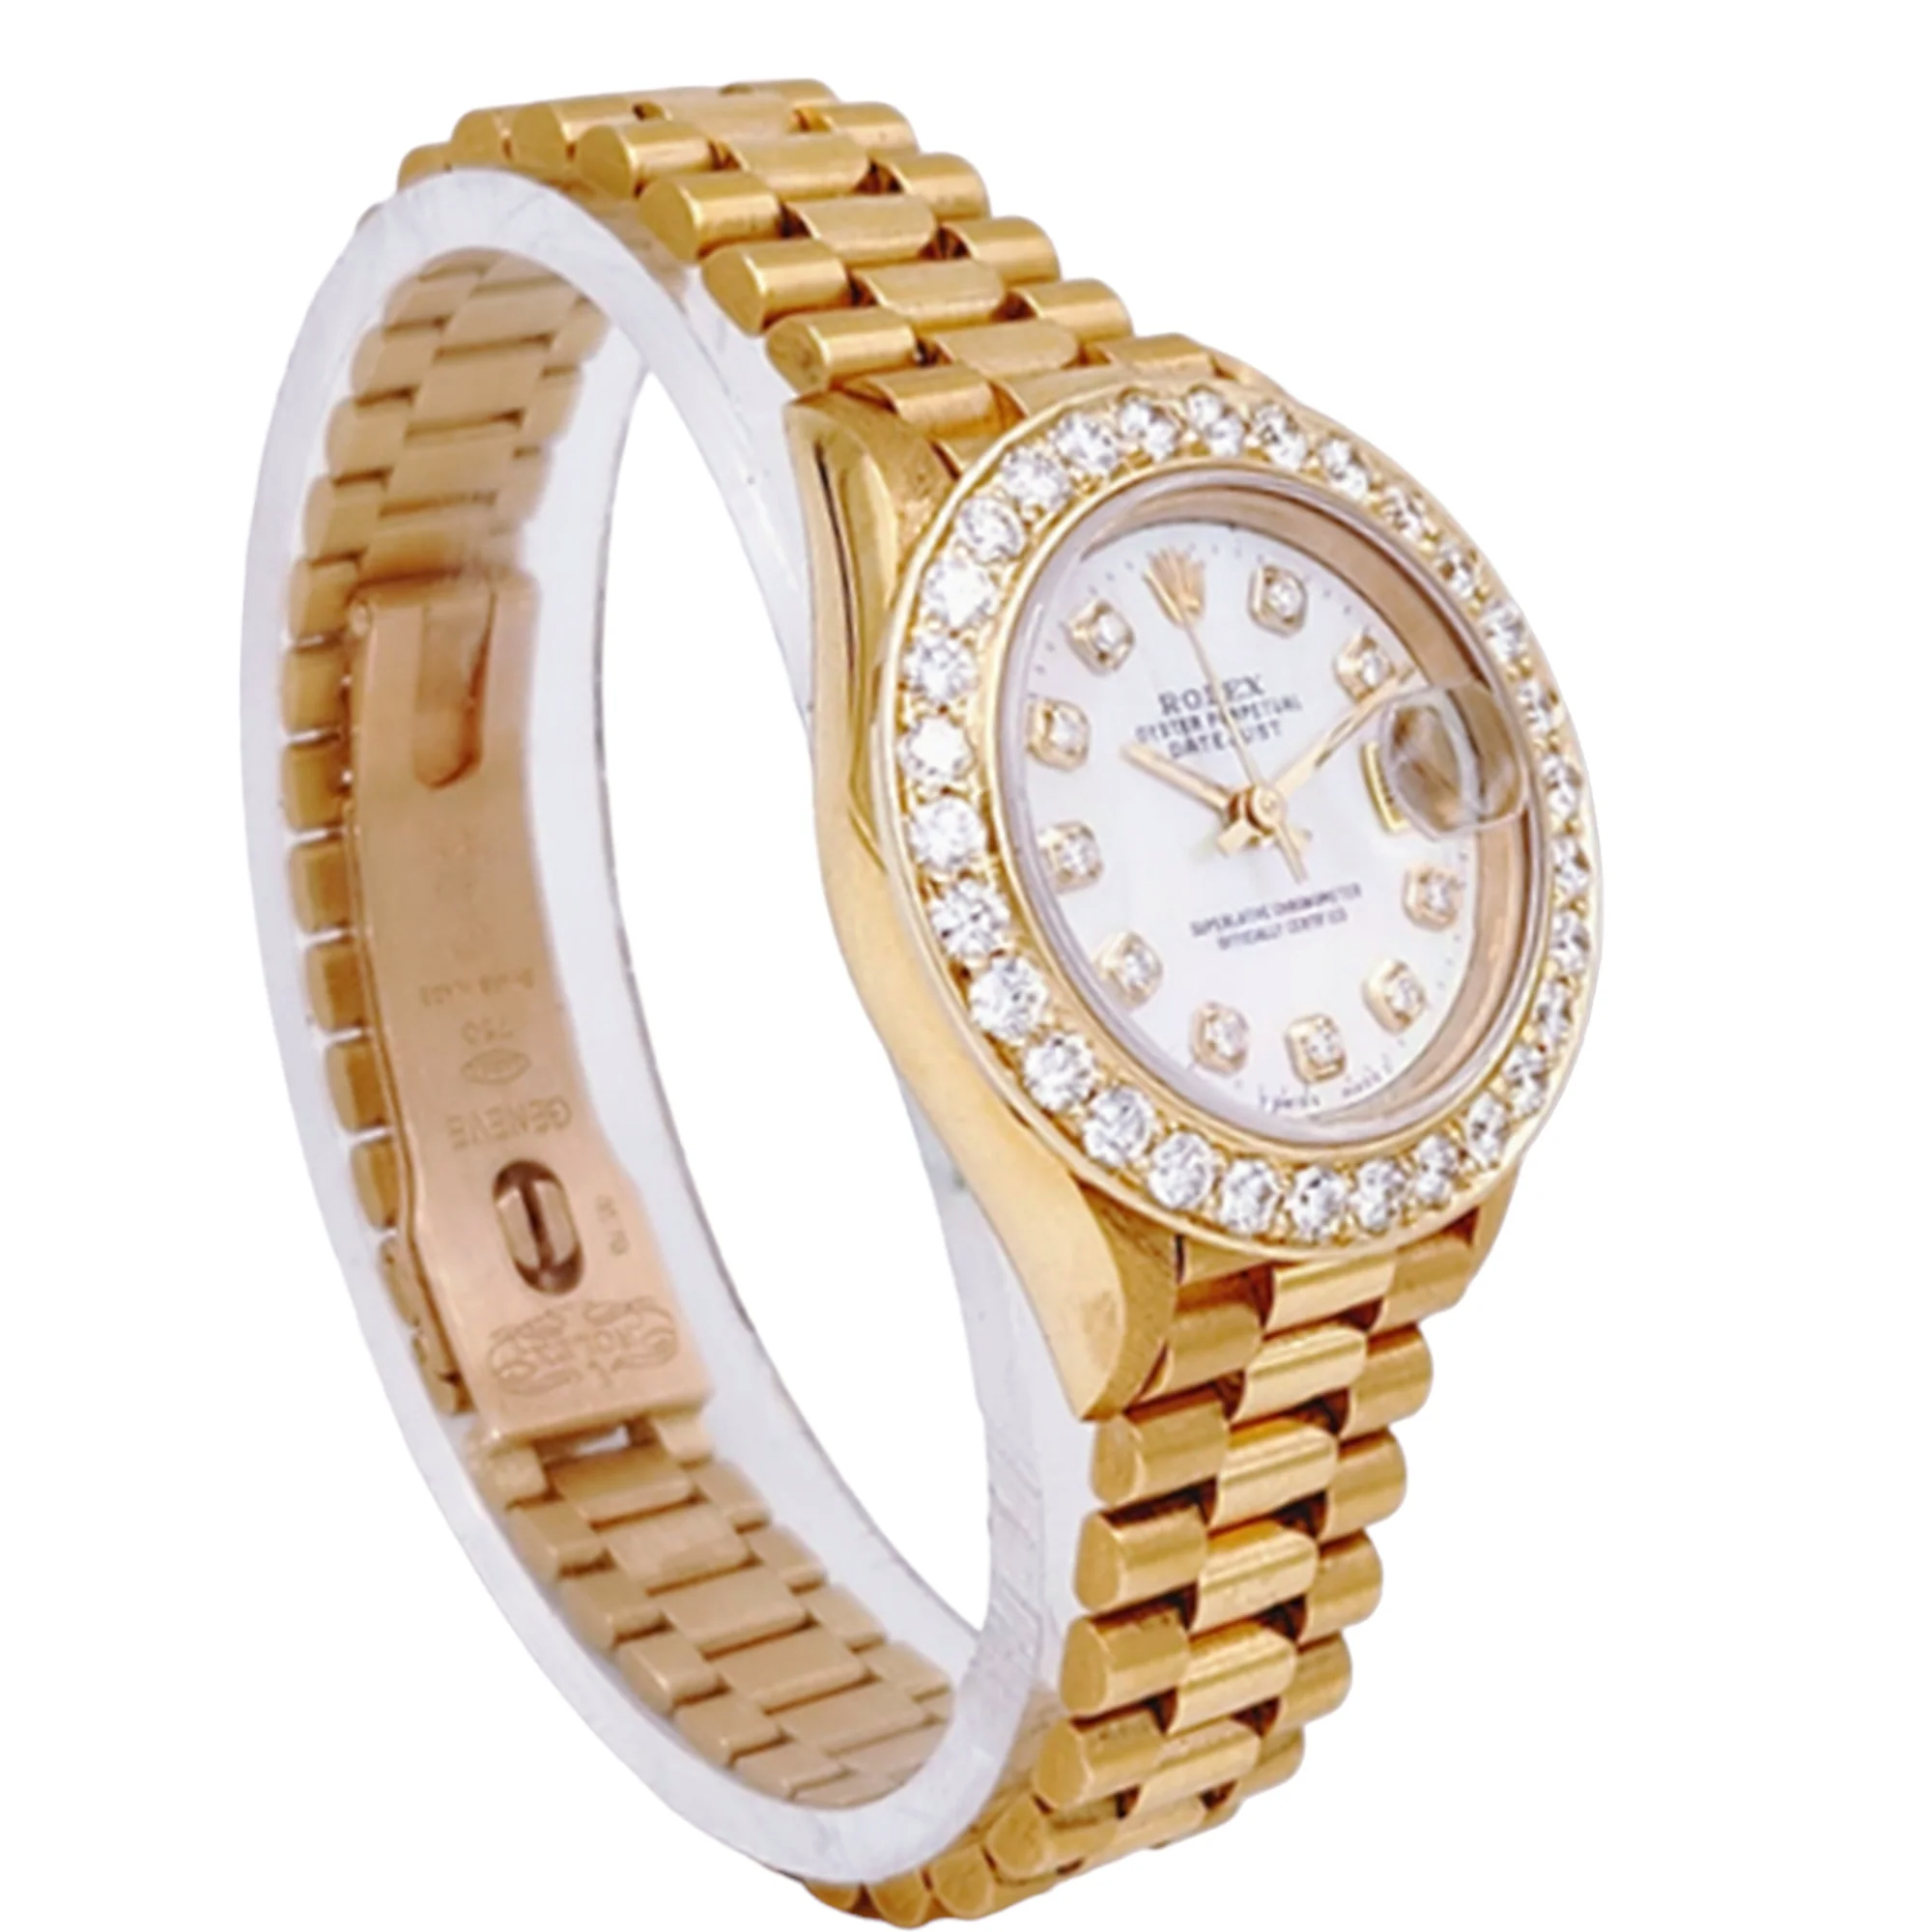 Ladies Rolex 26mm Presidential 18K Solid Yellow Gold Watch with Mother of Pearl Diamond Dial and 2CT. Diamond Bezel. (NEW 69178)